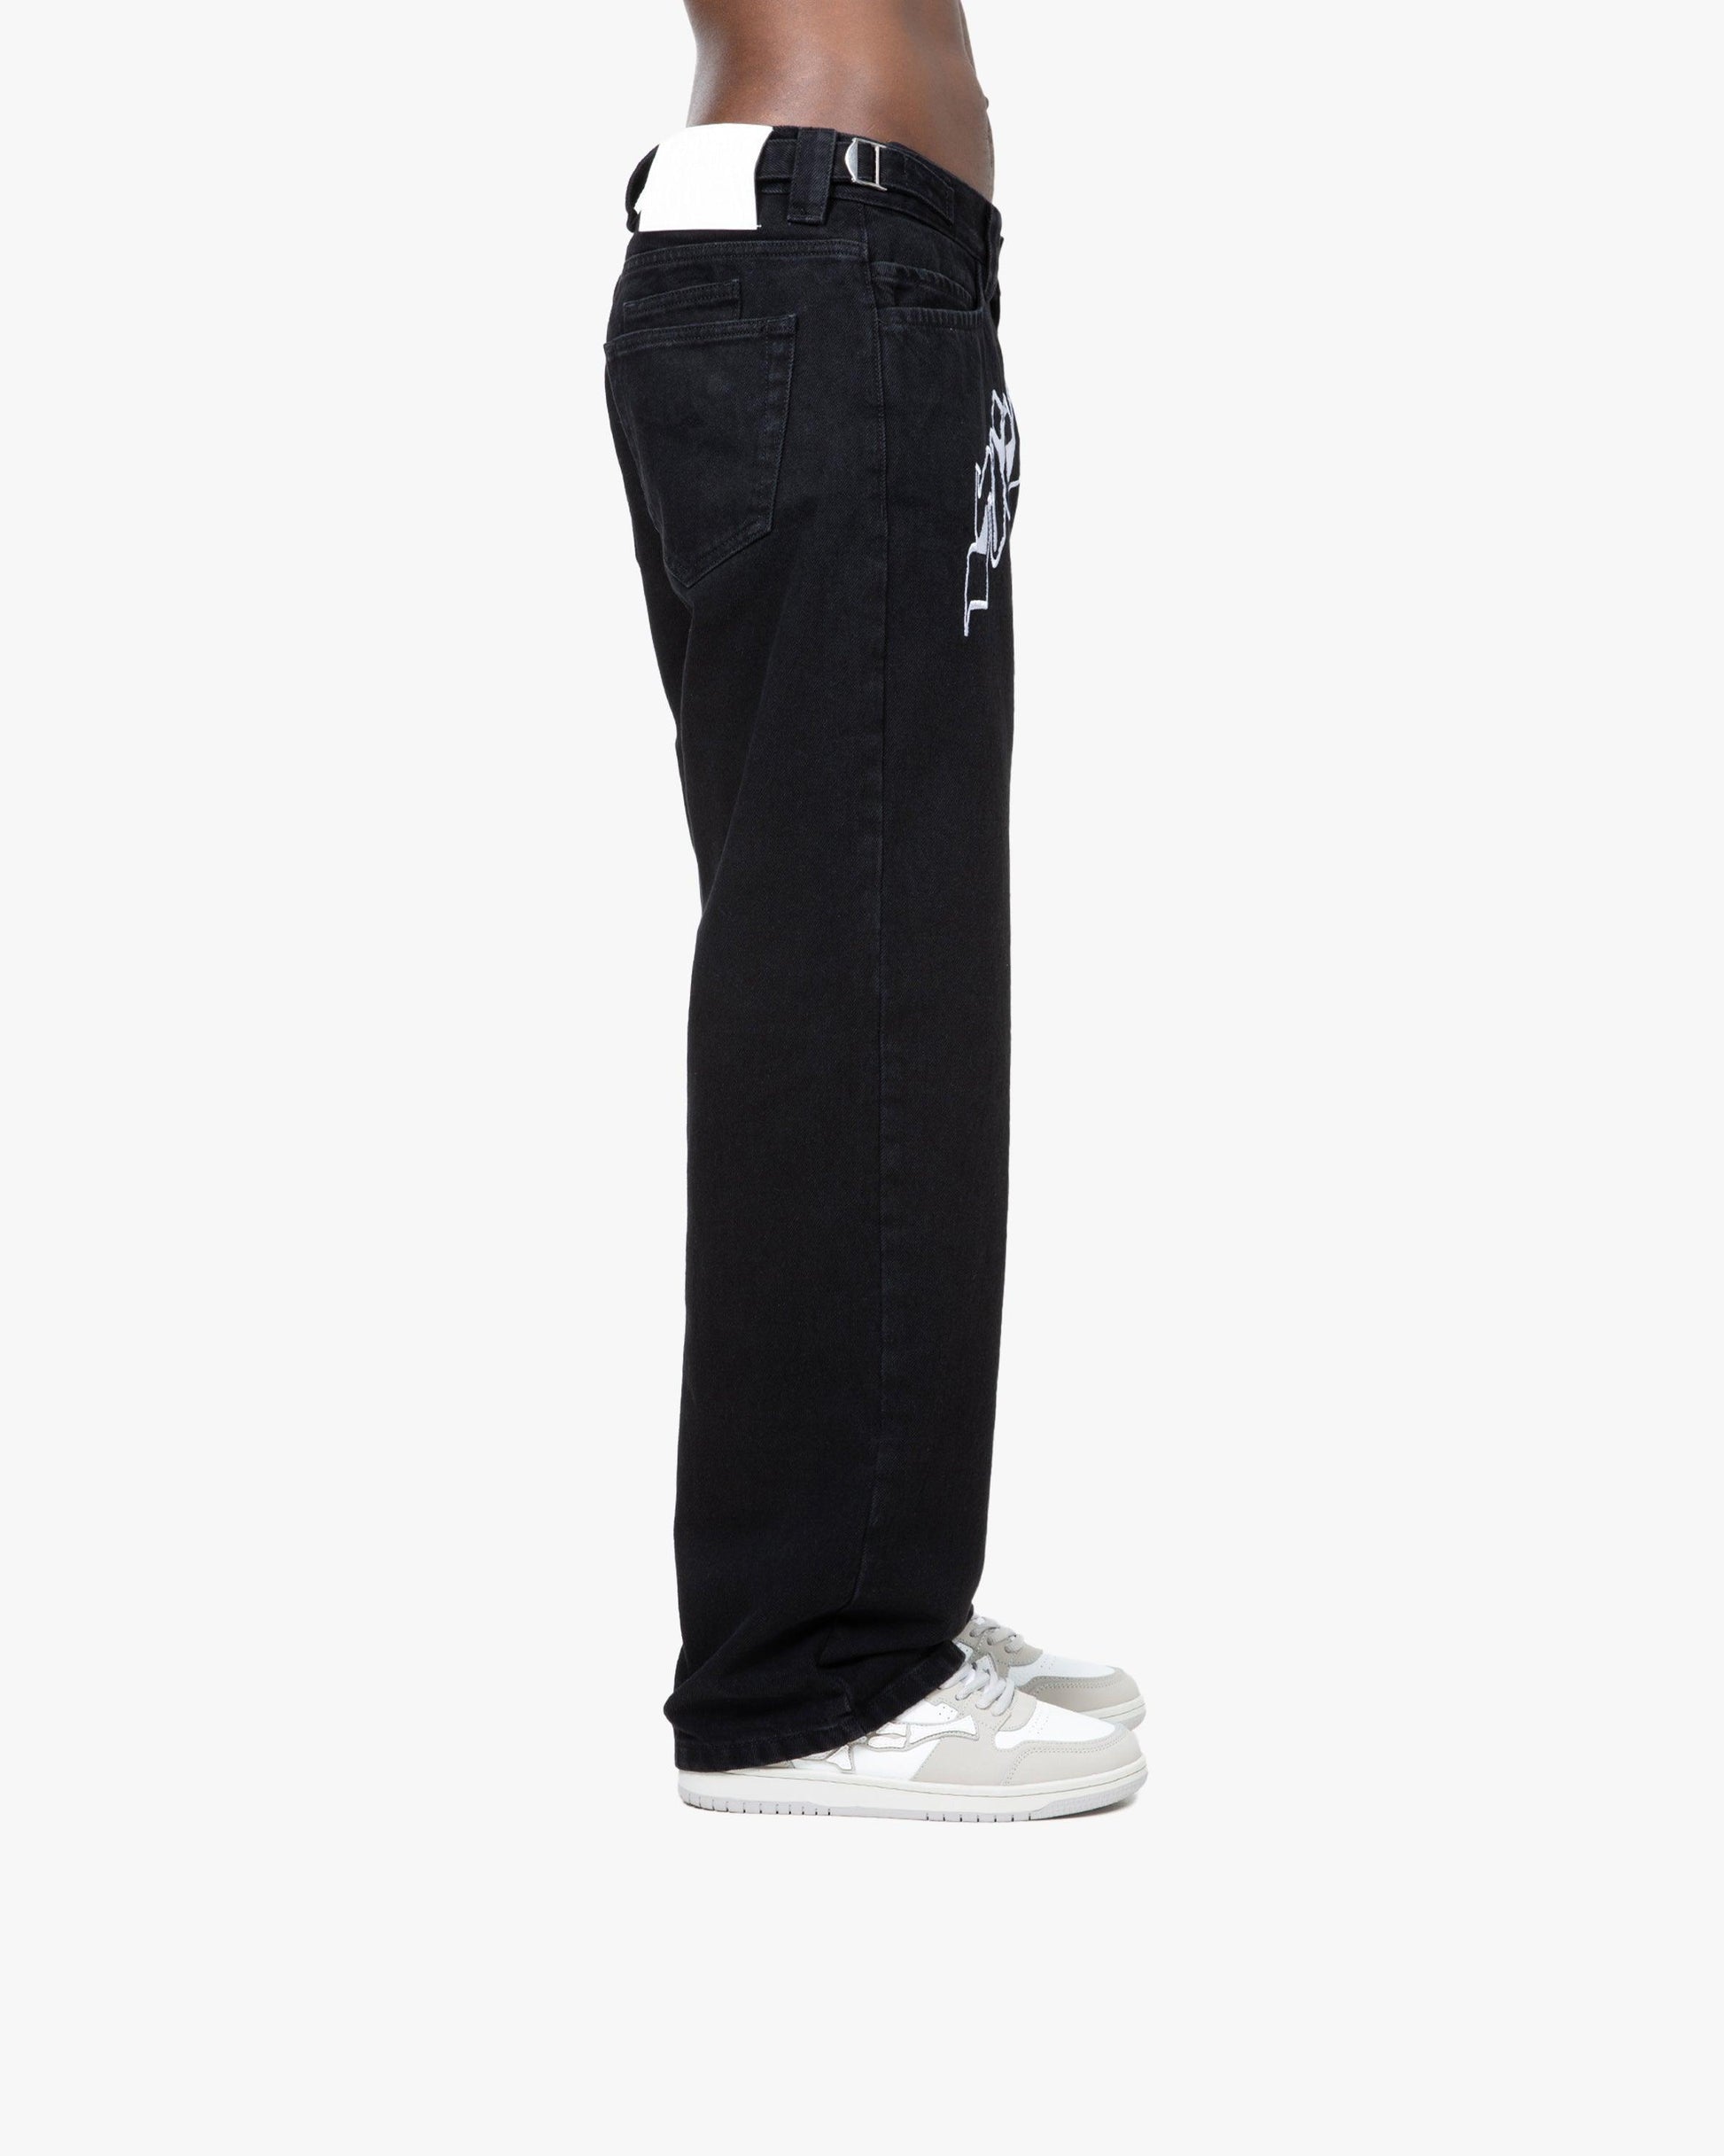 OUTLINED MIRAGE DENIM BLACK / WHITE - VICINITY